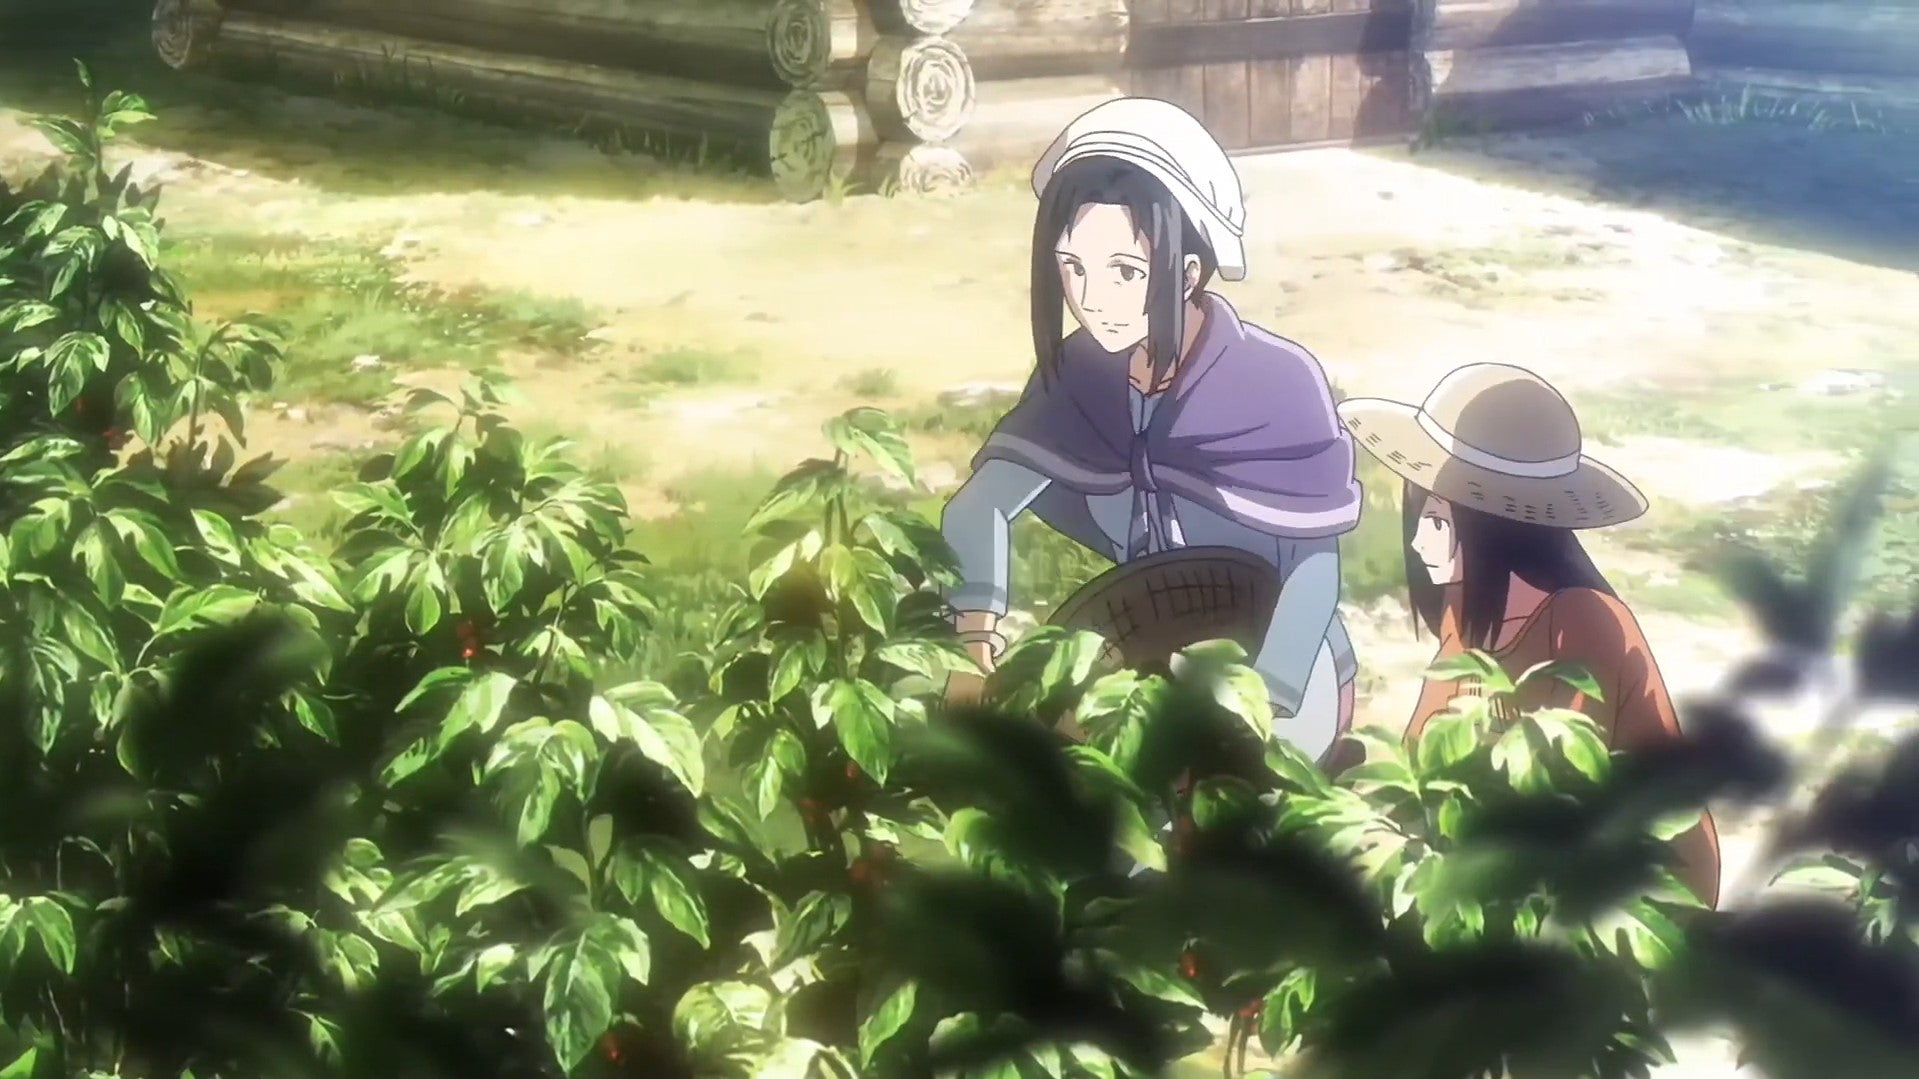 Attack On Titan Mikasa as a child living peacefully